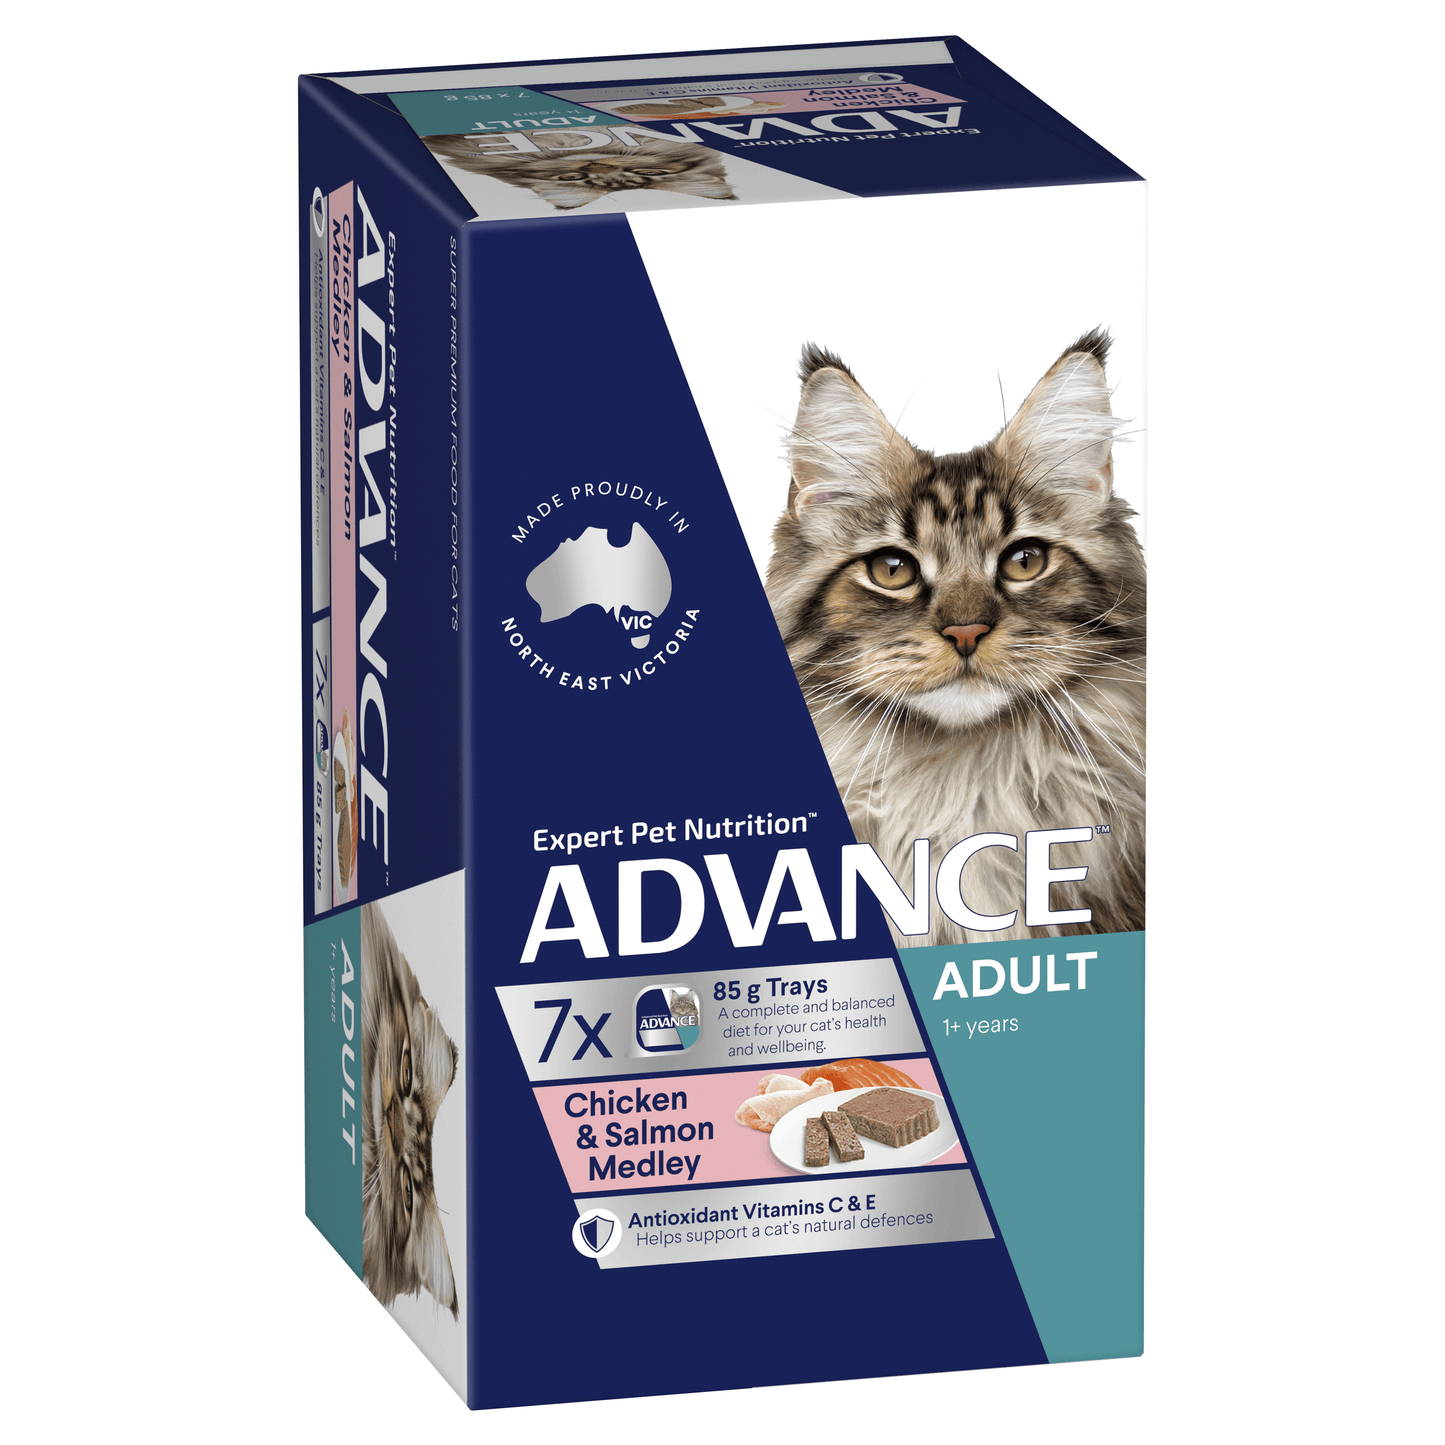 Advance Wet Food Tray Adult Cat Chicken & Salmon Medley 7 x 85g